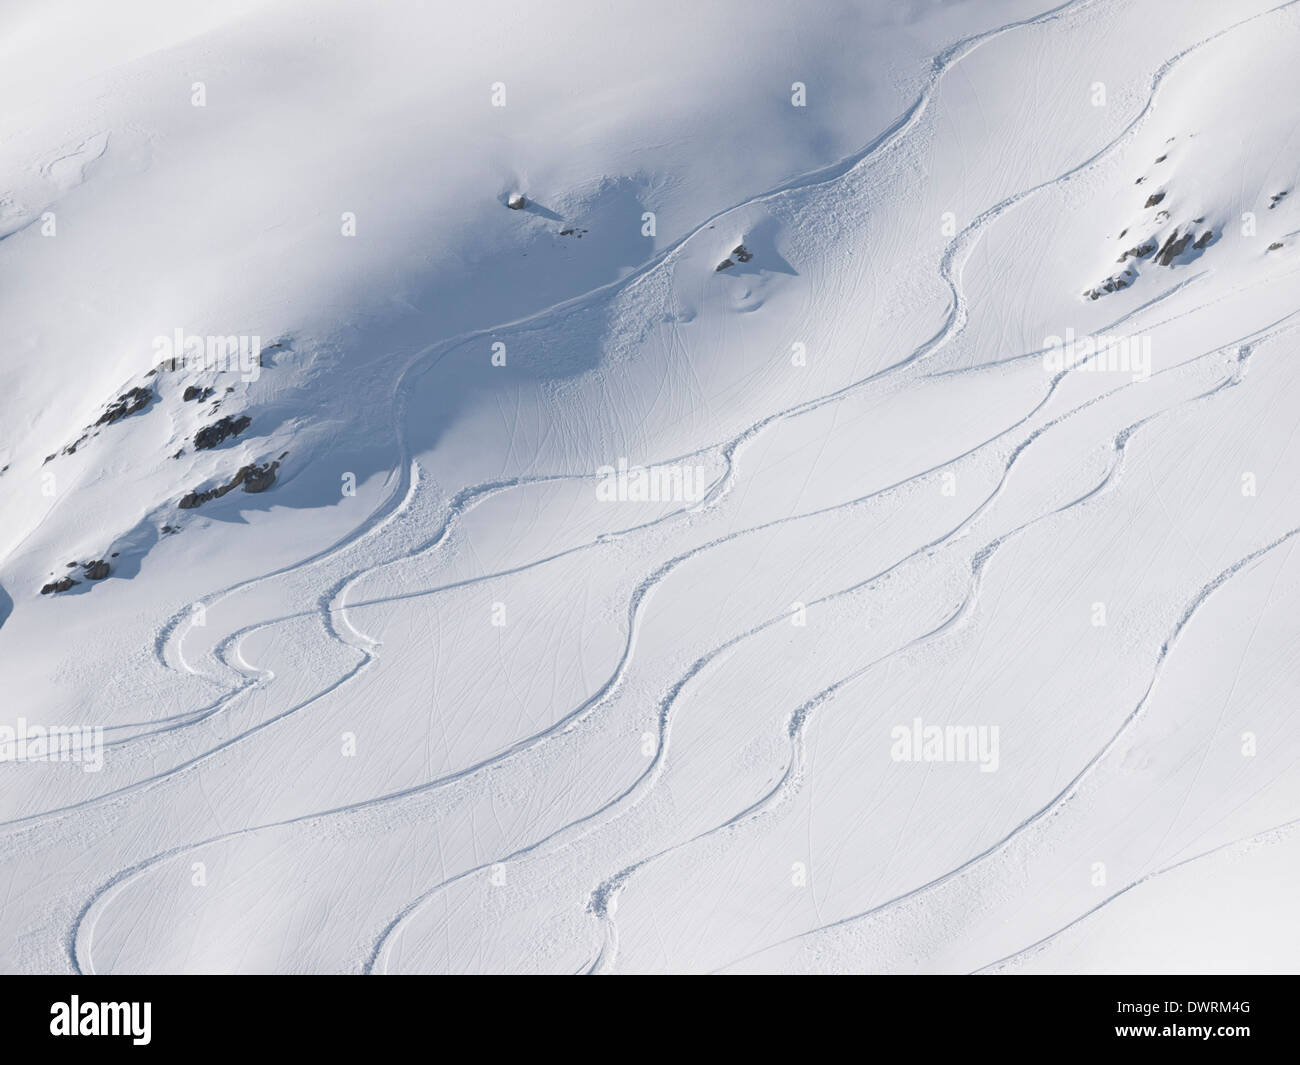 backcountry skiier trails on an untouched piste Stock Photo